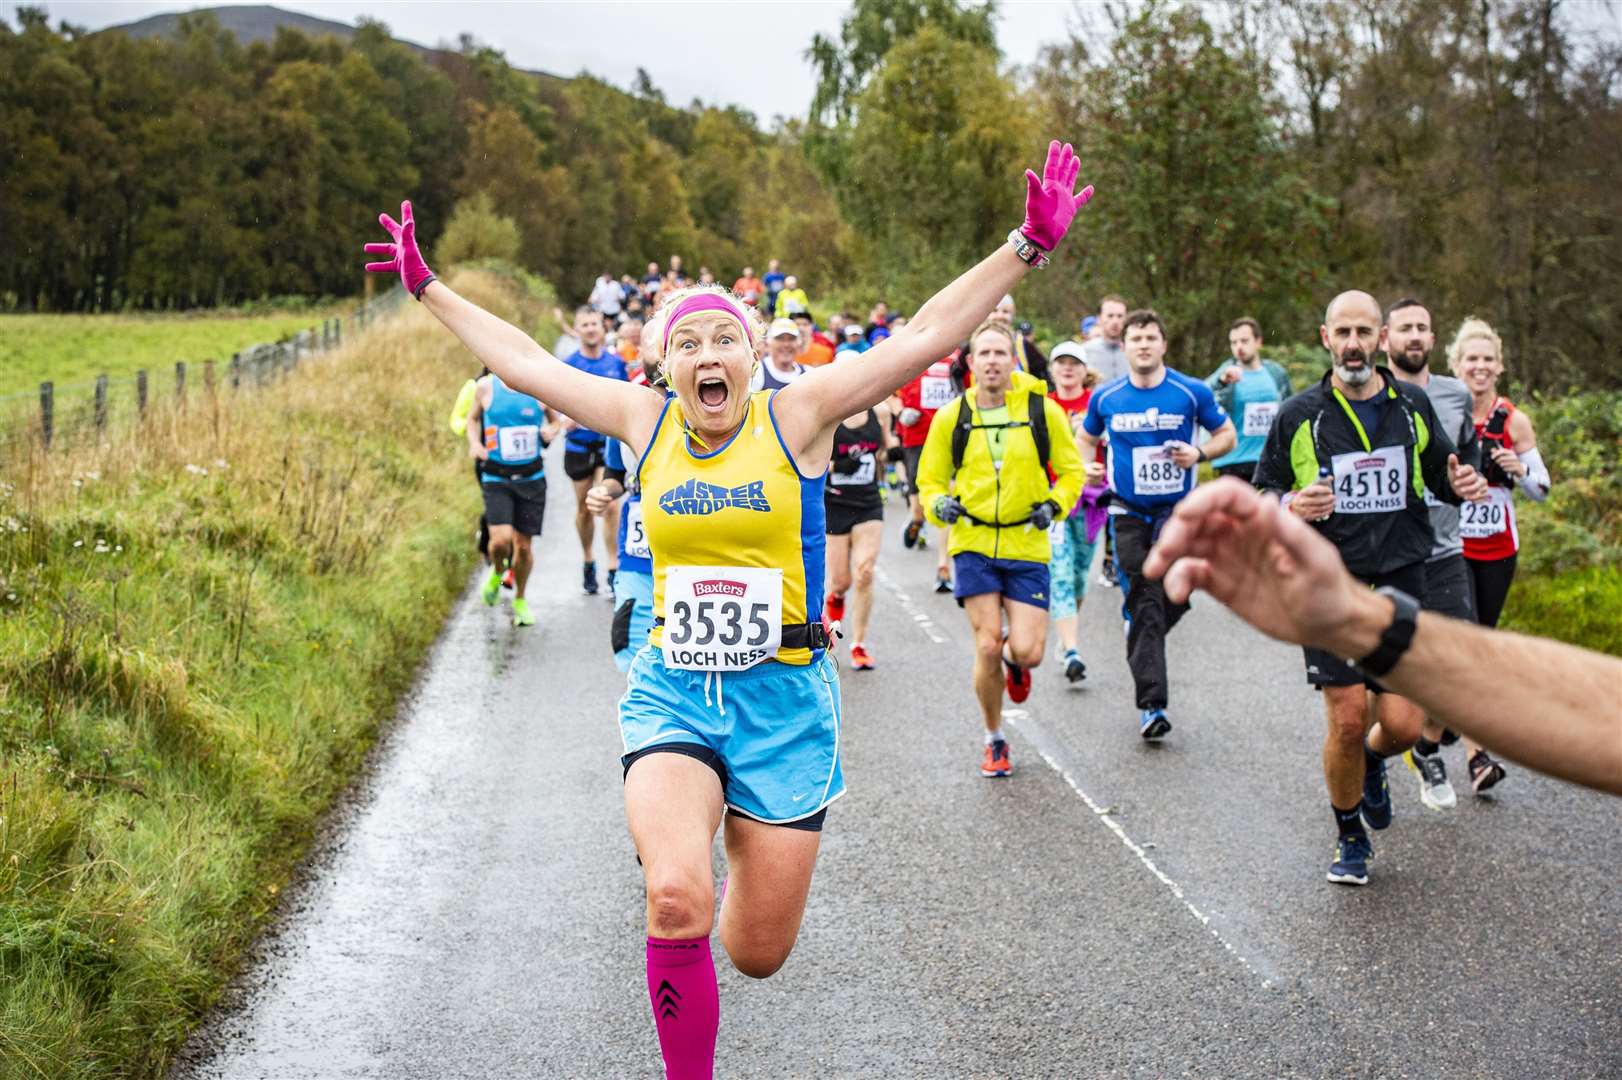 The Loch Ness Marathon follows the shore from Whitebridge to the centre of Inverness.